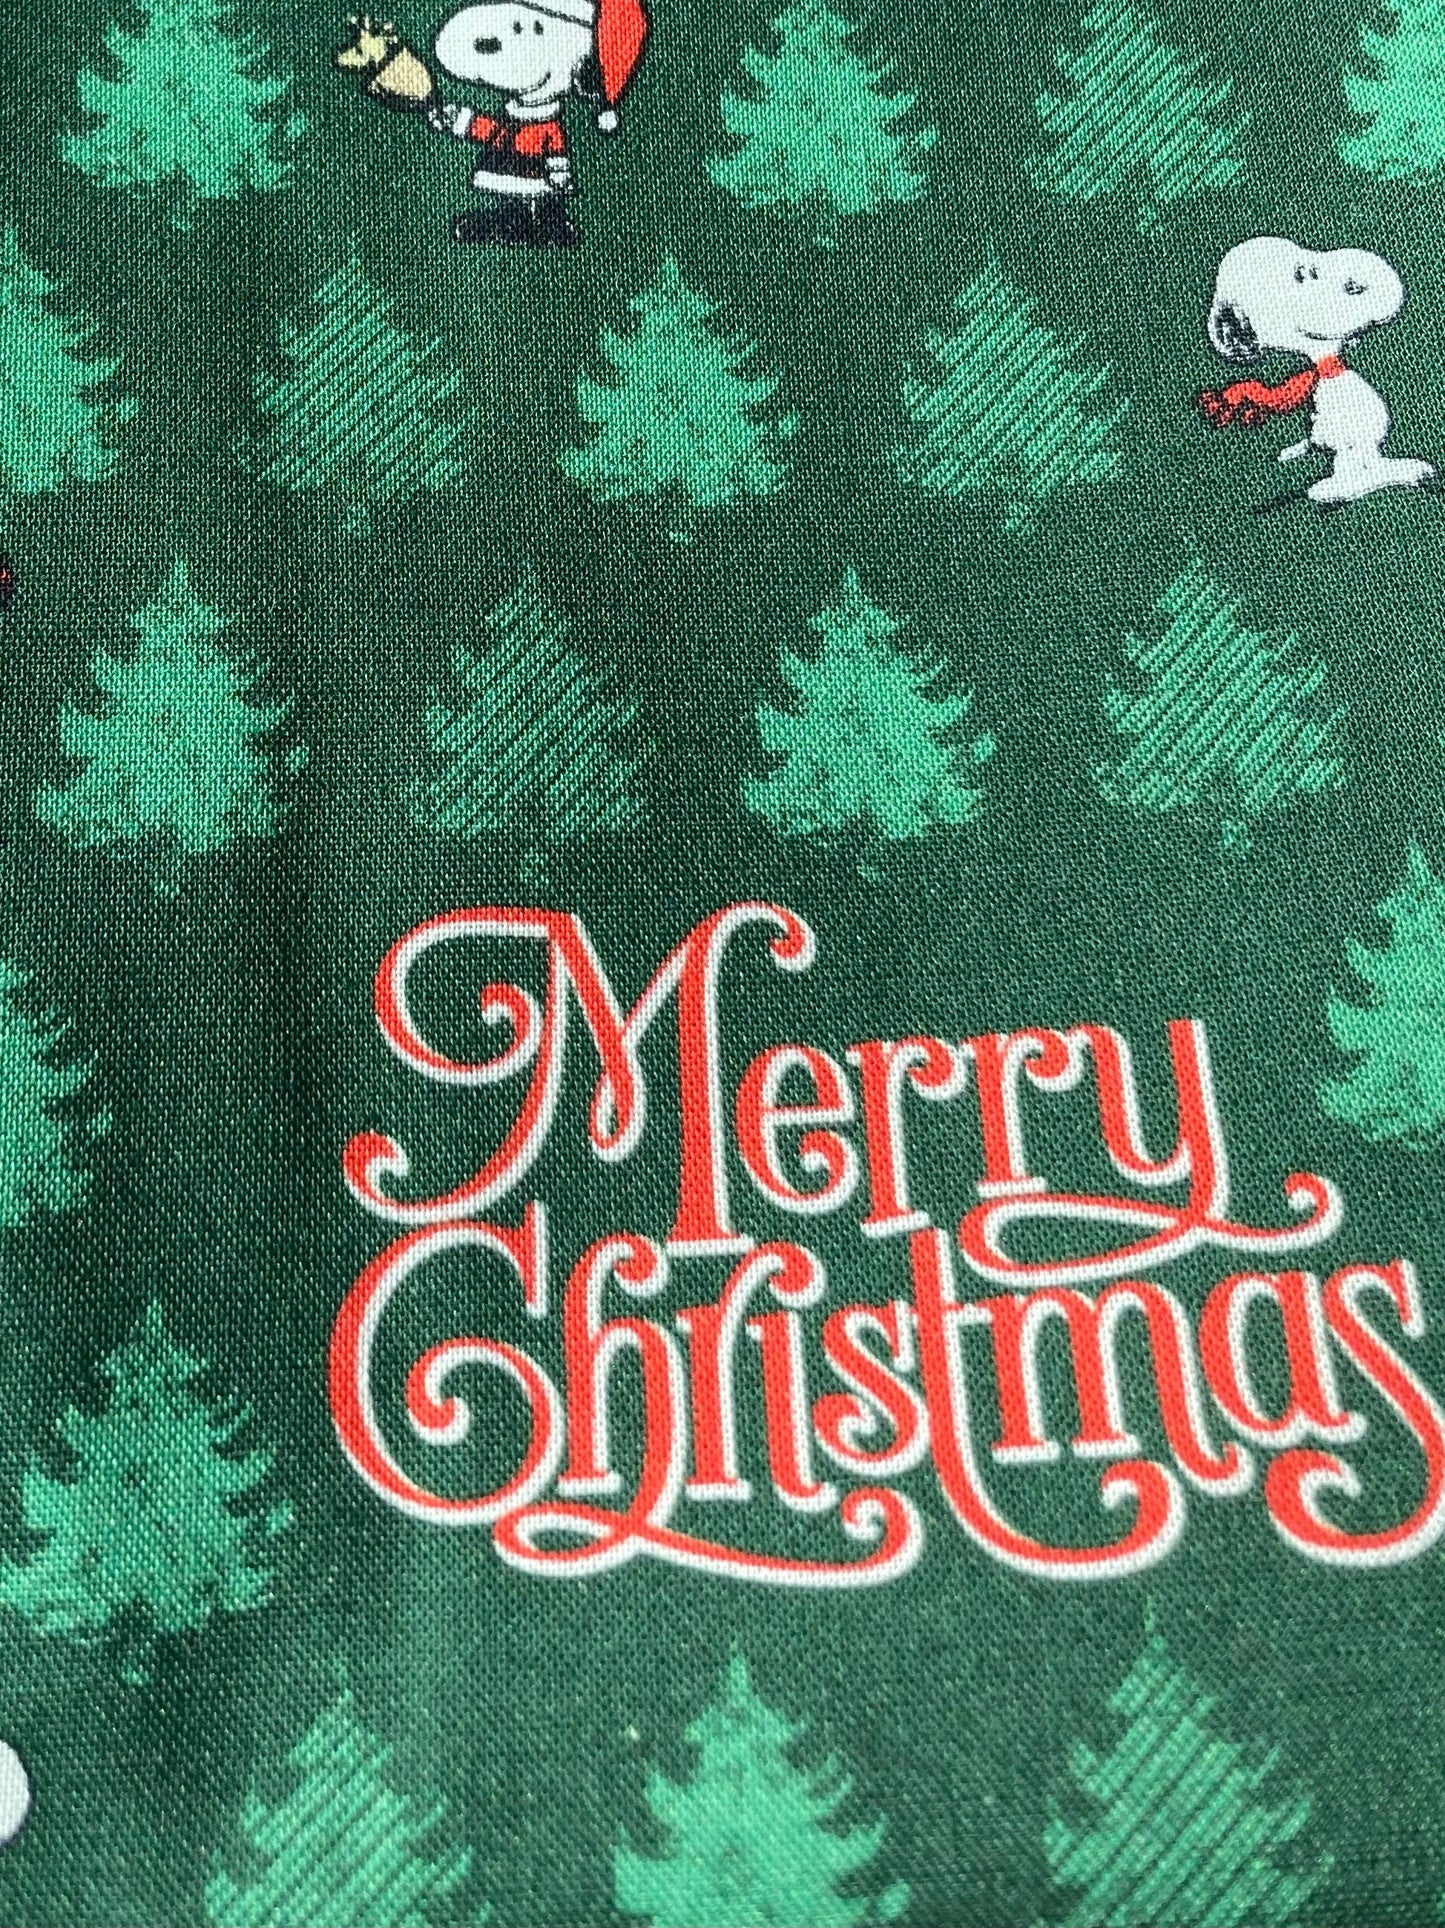 The happiest Snoopy Merry Christmas blanket